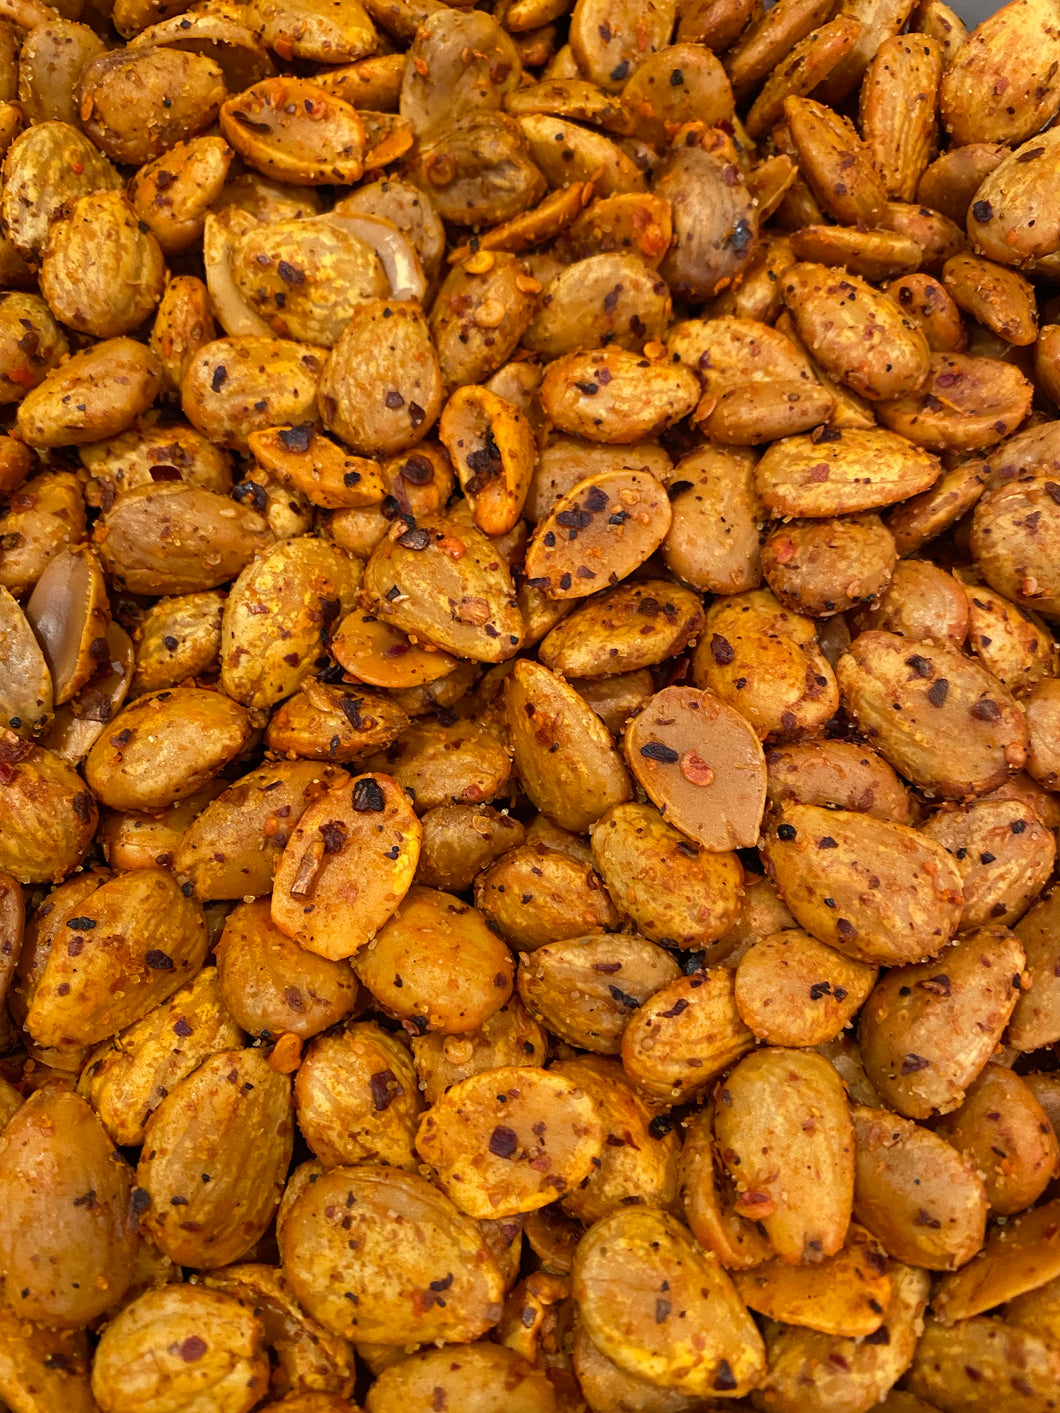 Paprika Spiced Valencia Almonds Blanched, Fried With Sea Salt - 100g